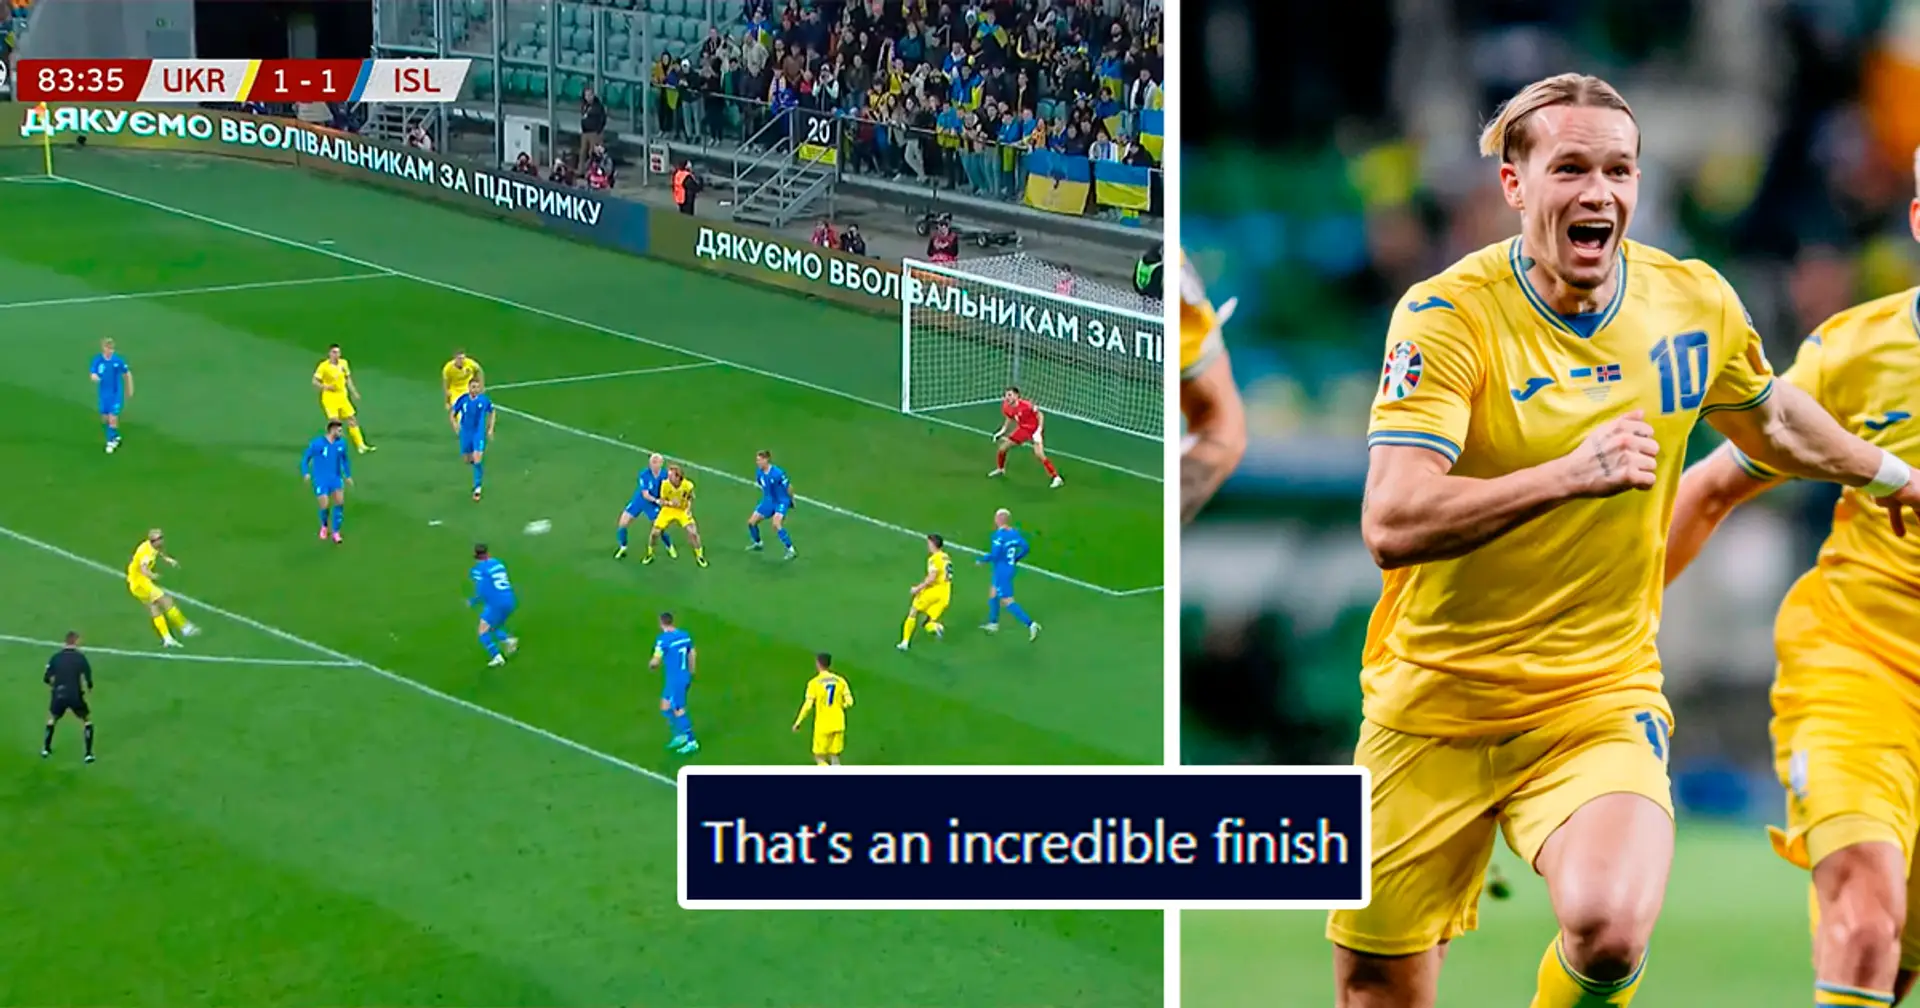 'He is becoming clutch': Chelsea fans react to Mudryk's winner  for Ukraine to send them to EURO